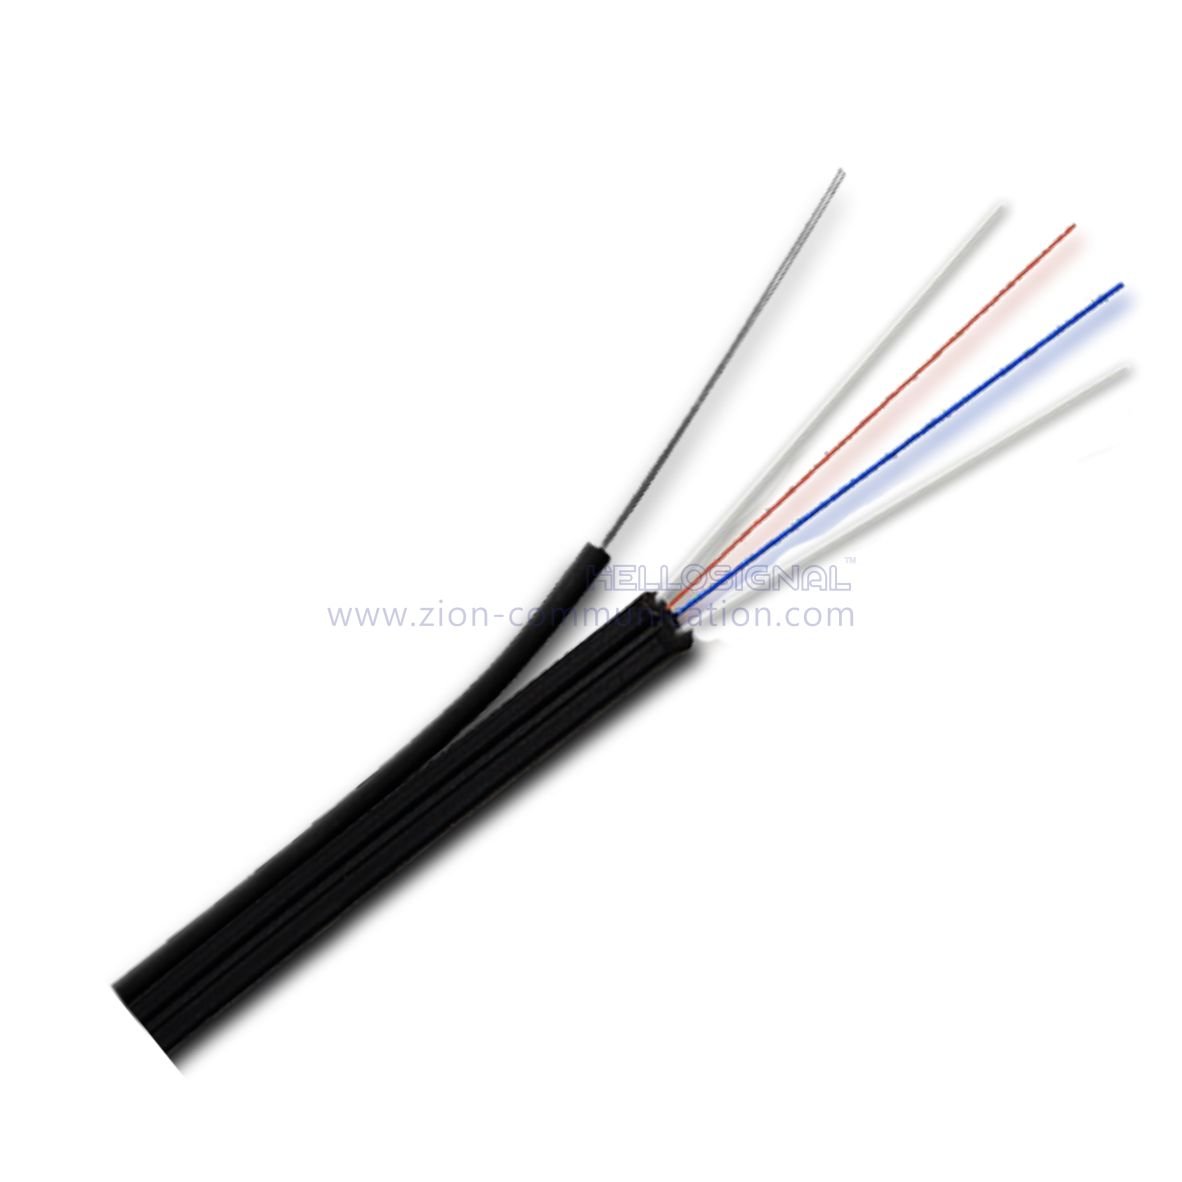 GJYXFCH-2 G657A1 Self-Supporting GFRP Drop cable